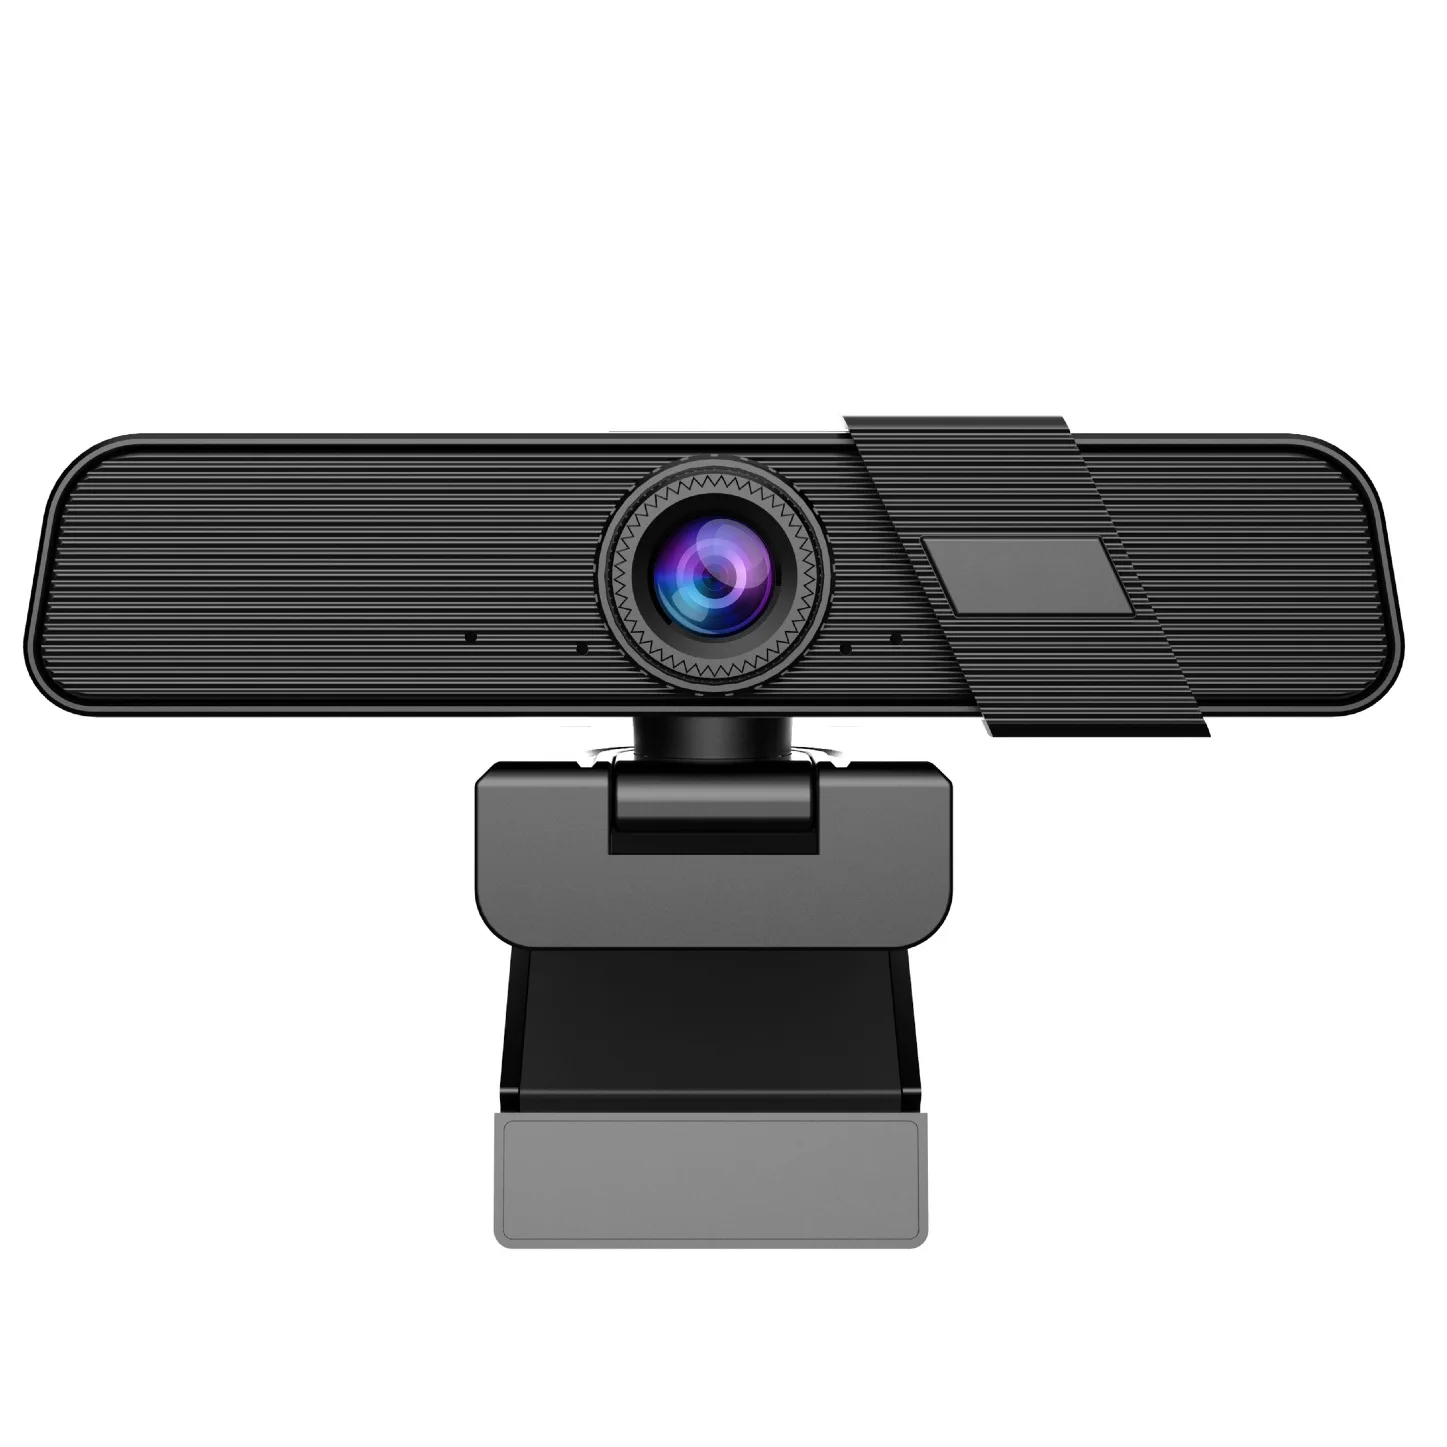 2K high Clear US B Dual Microphone Live Webcam 400 Wan US B camera 4 times electronic zoom spot Fast delivery